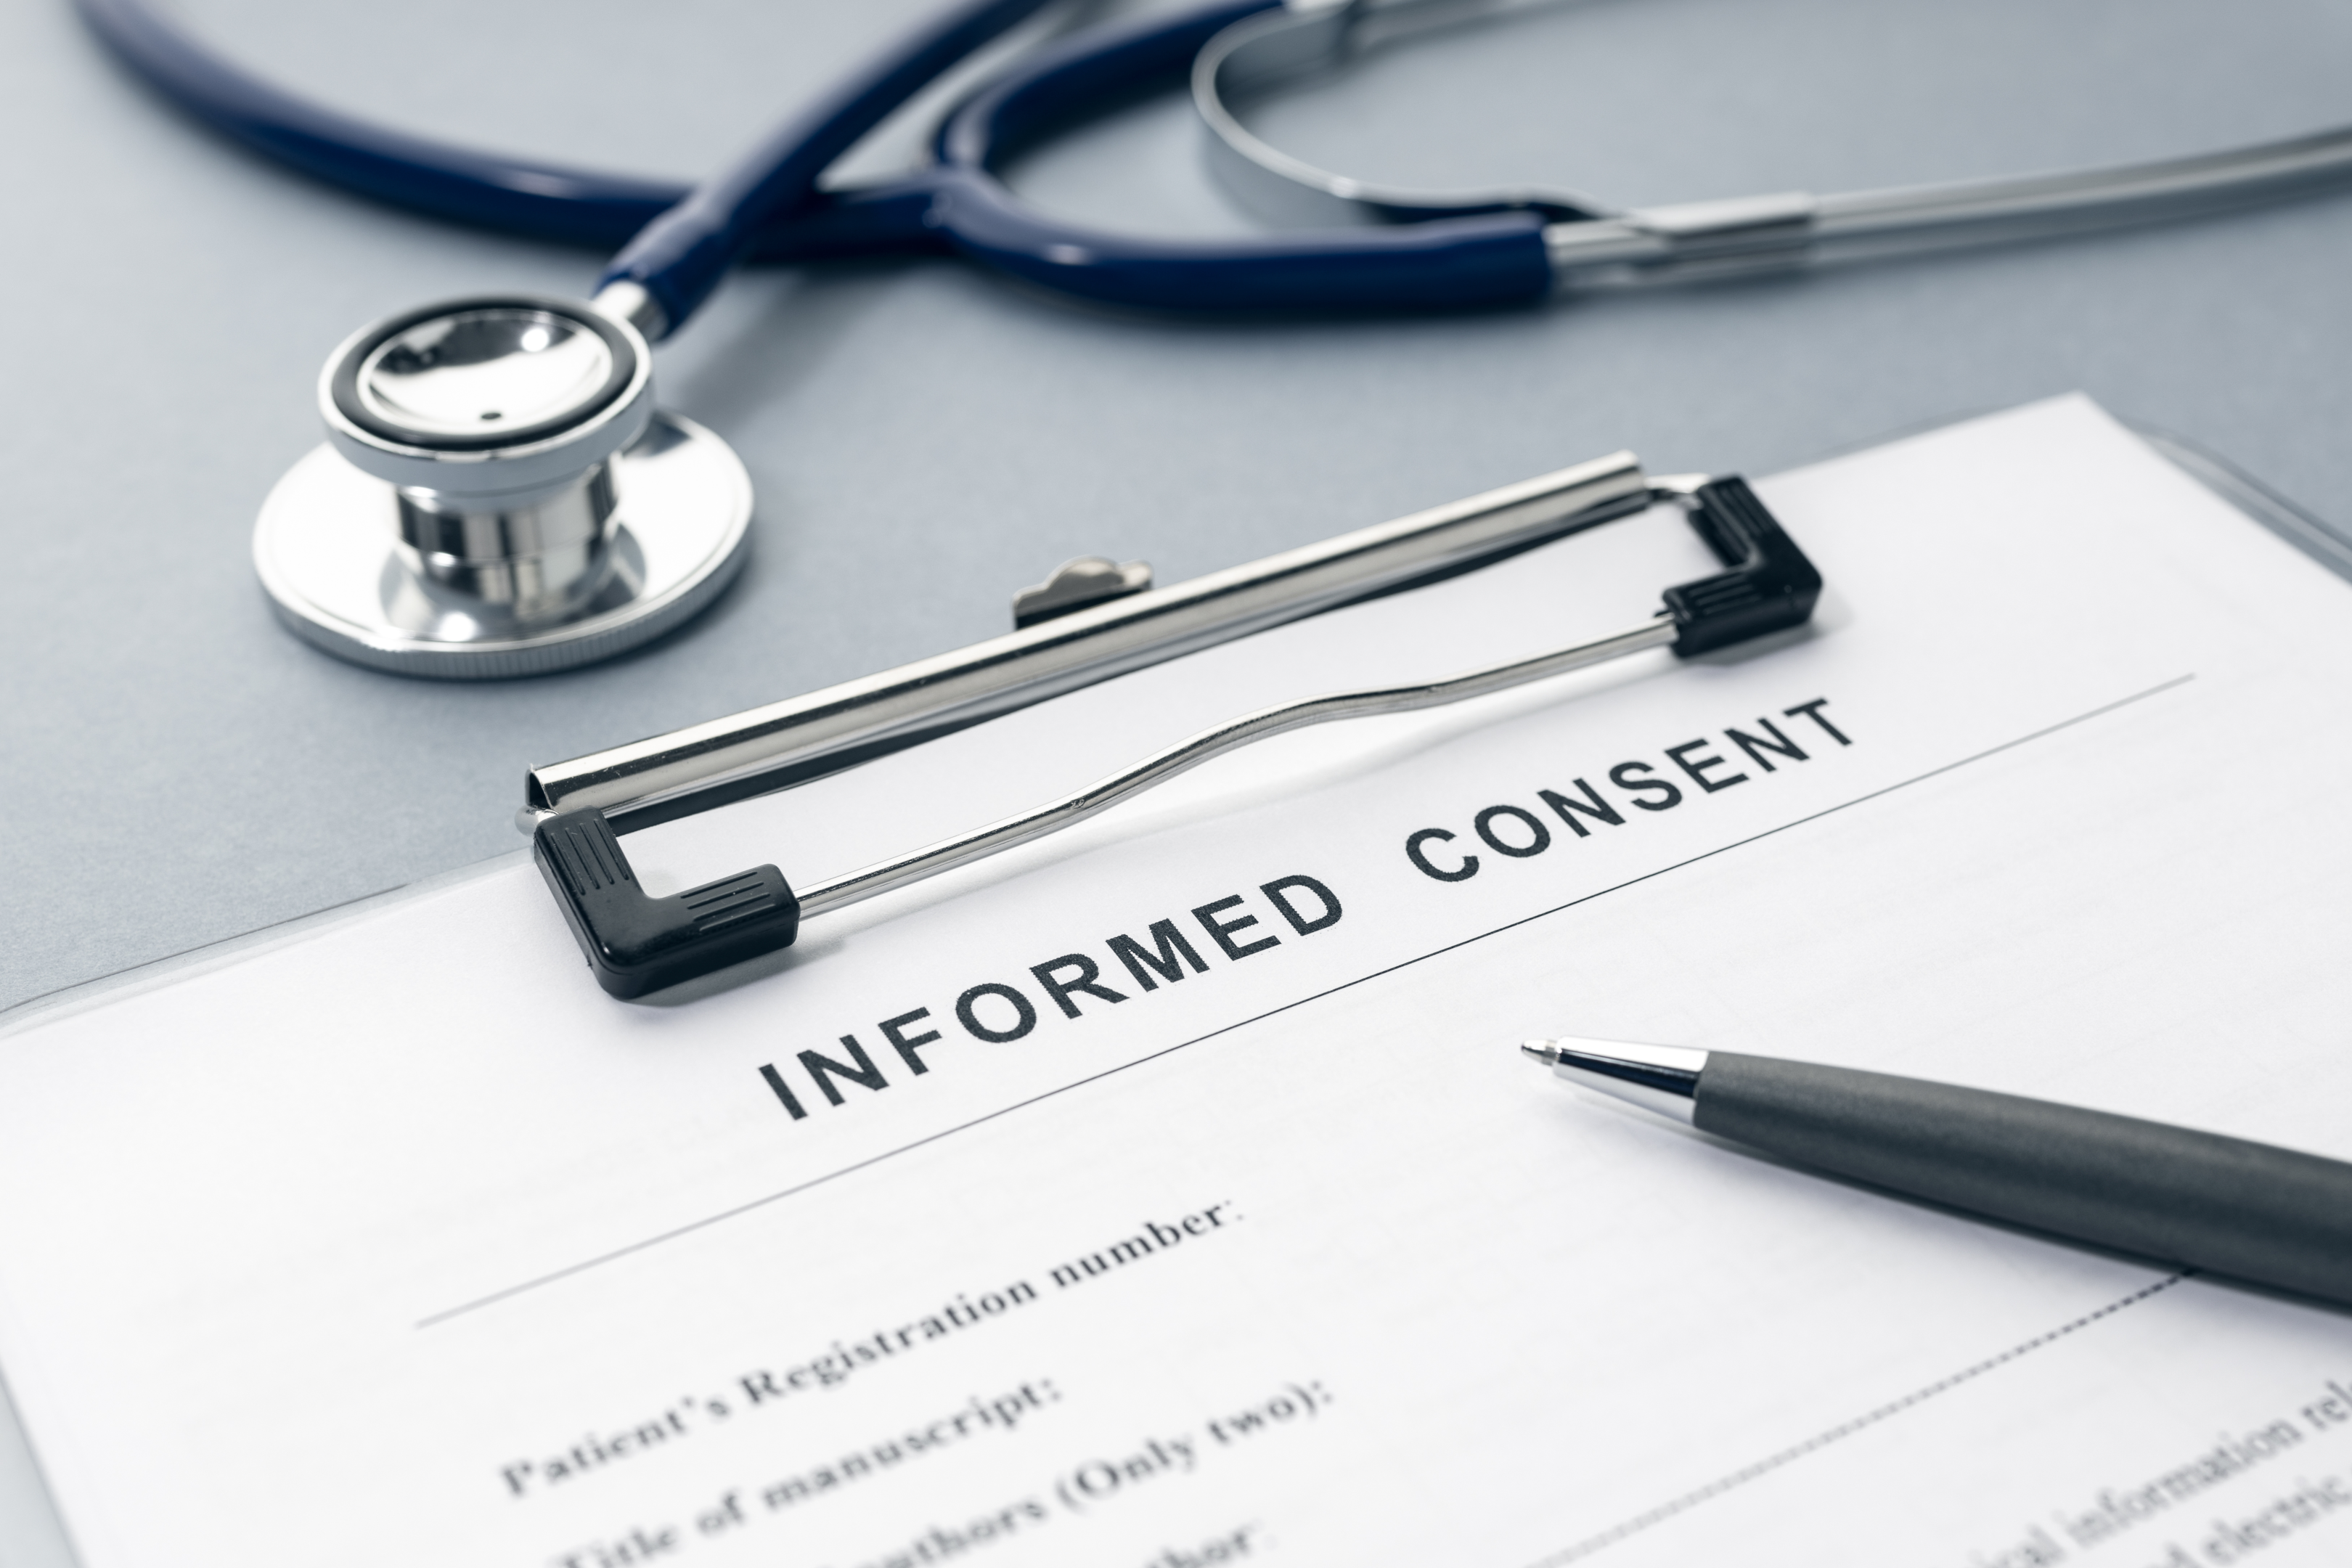 informed consent claim, reasonable patient gave informed consent